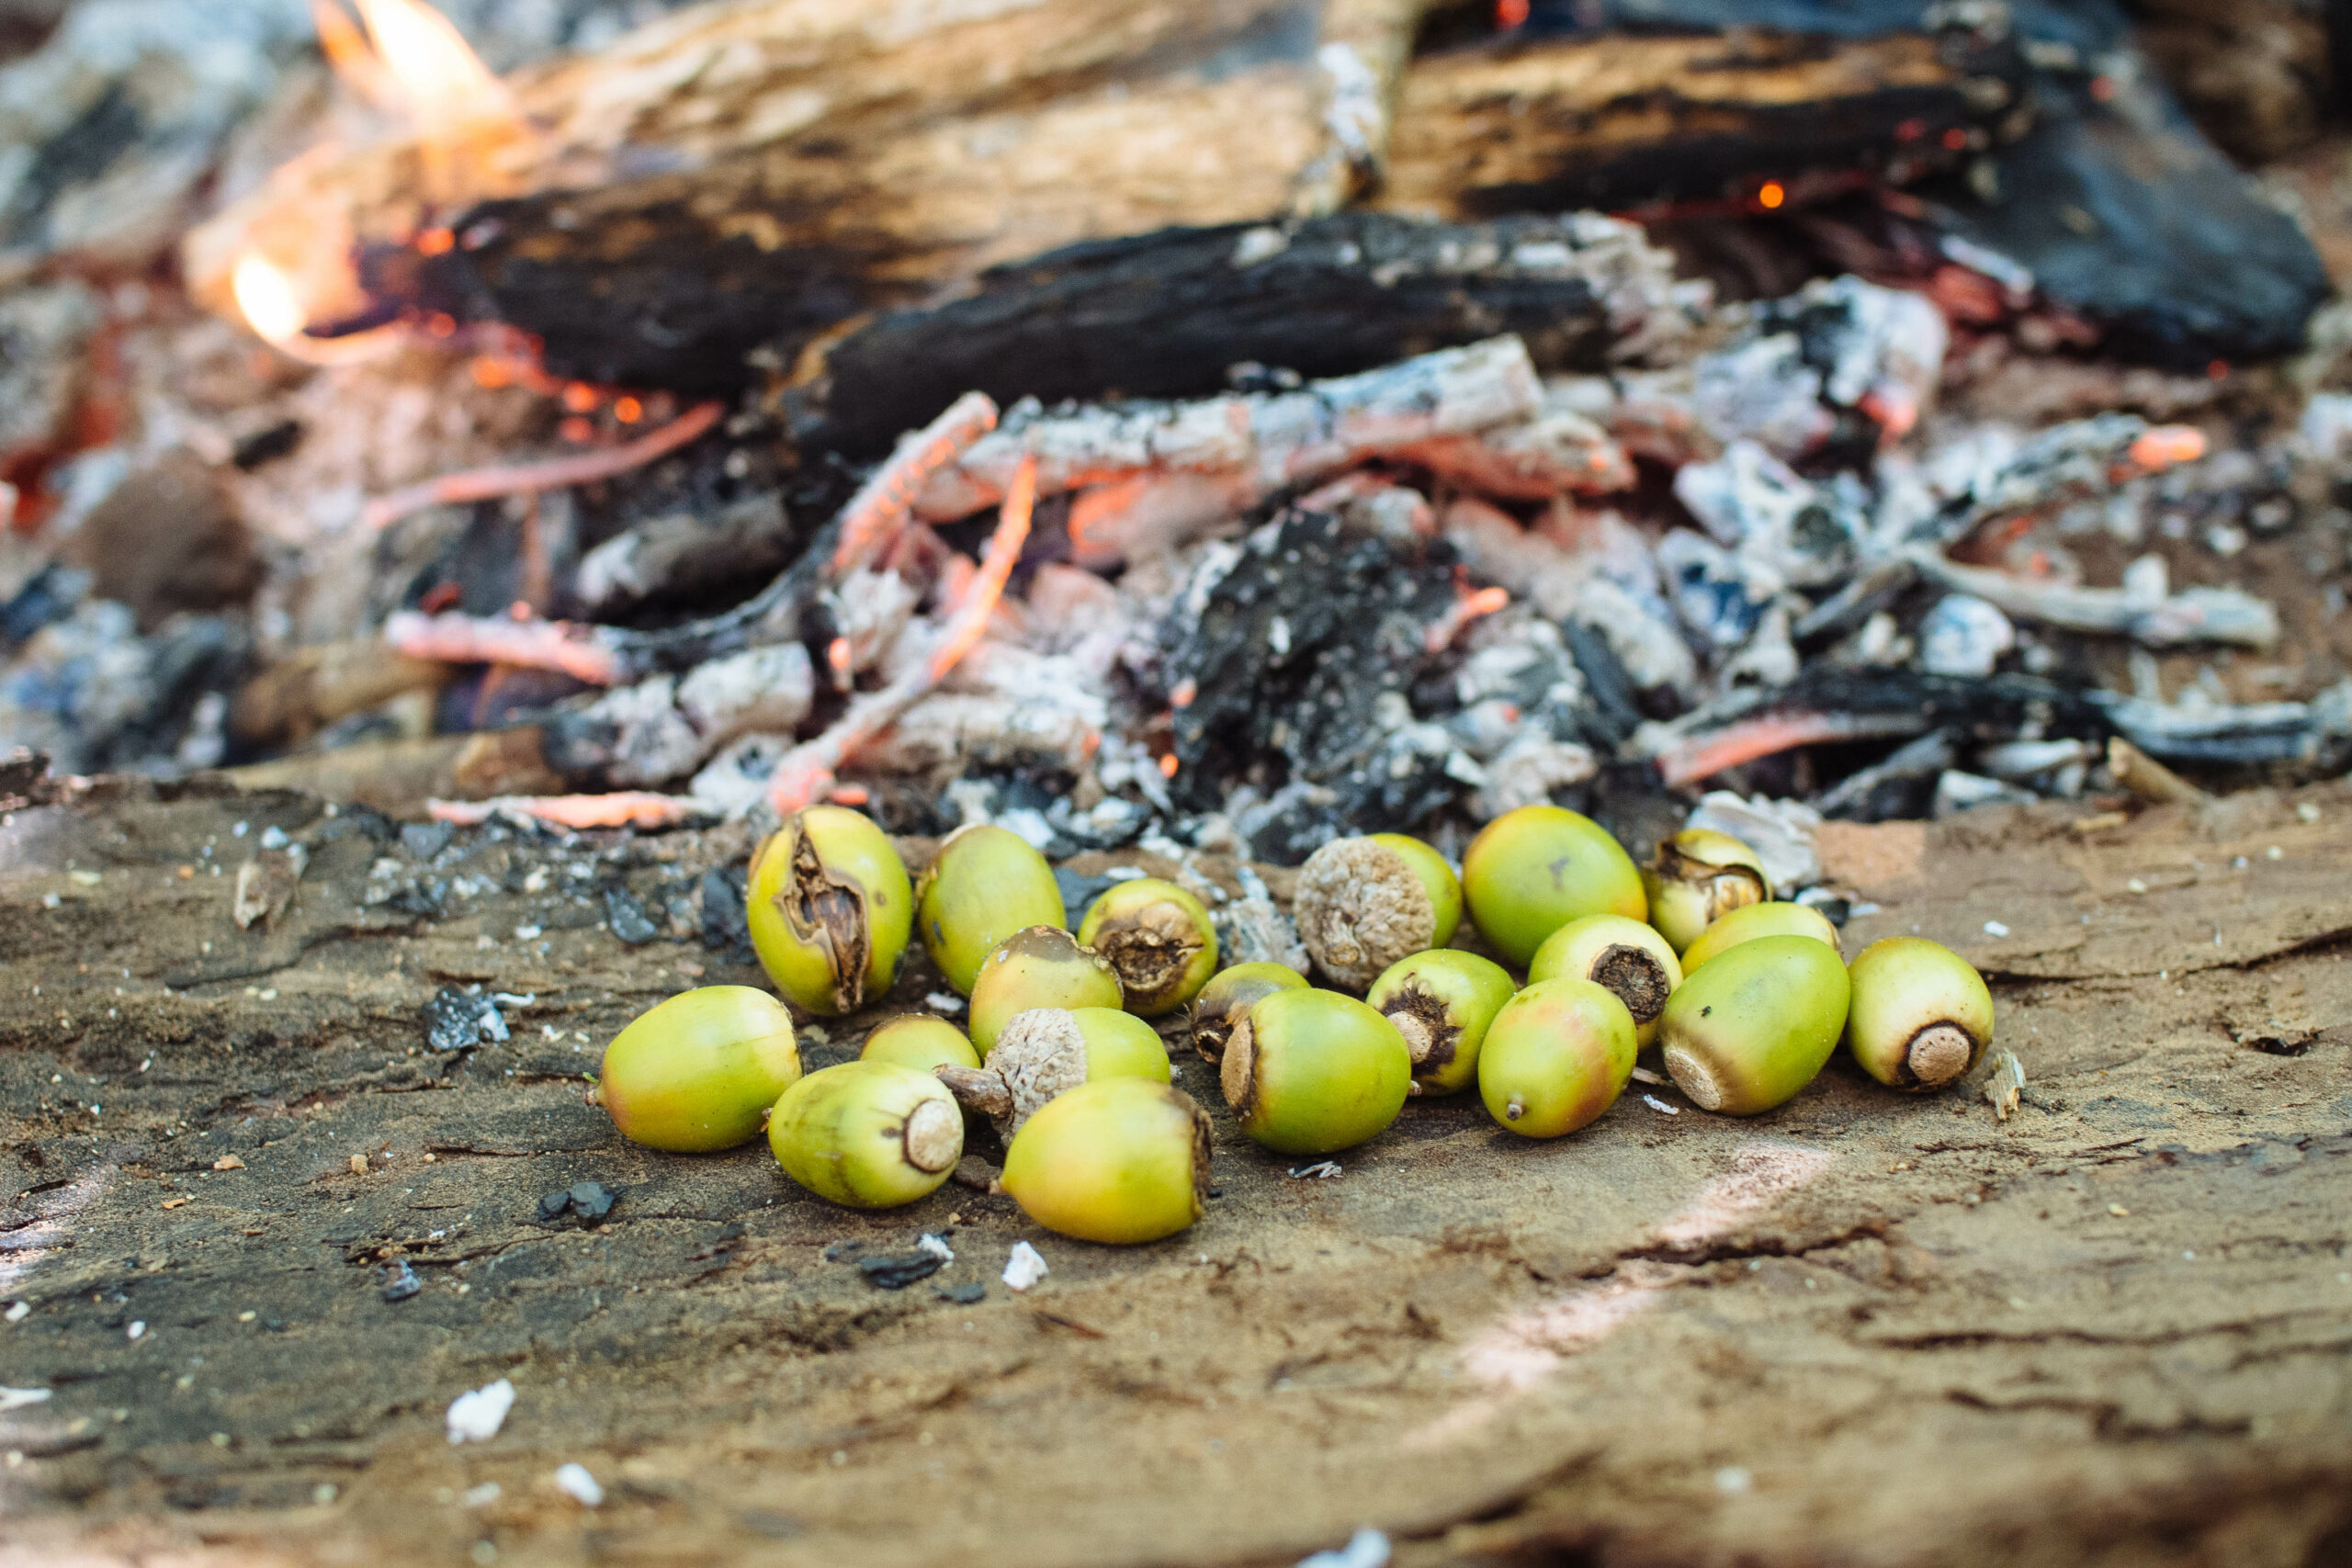 Acorns-by-the-fire-scaled.jpg